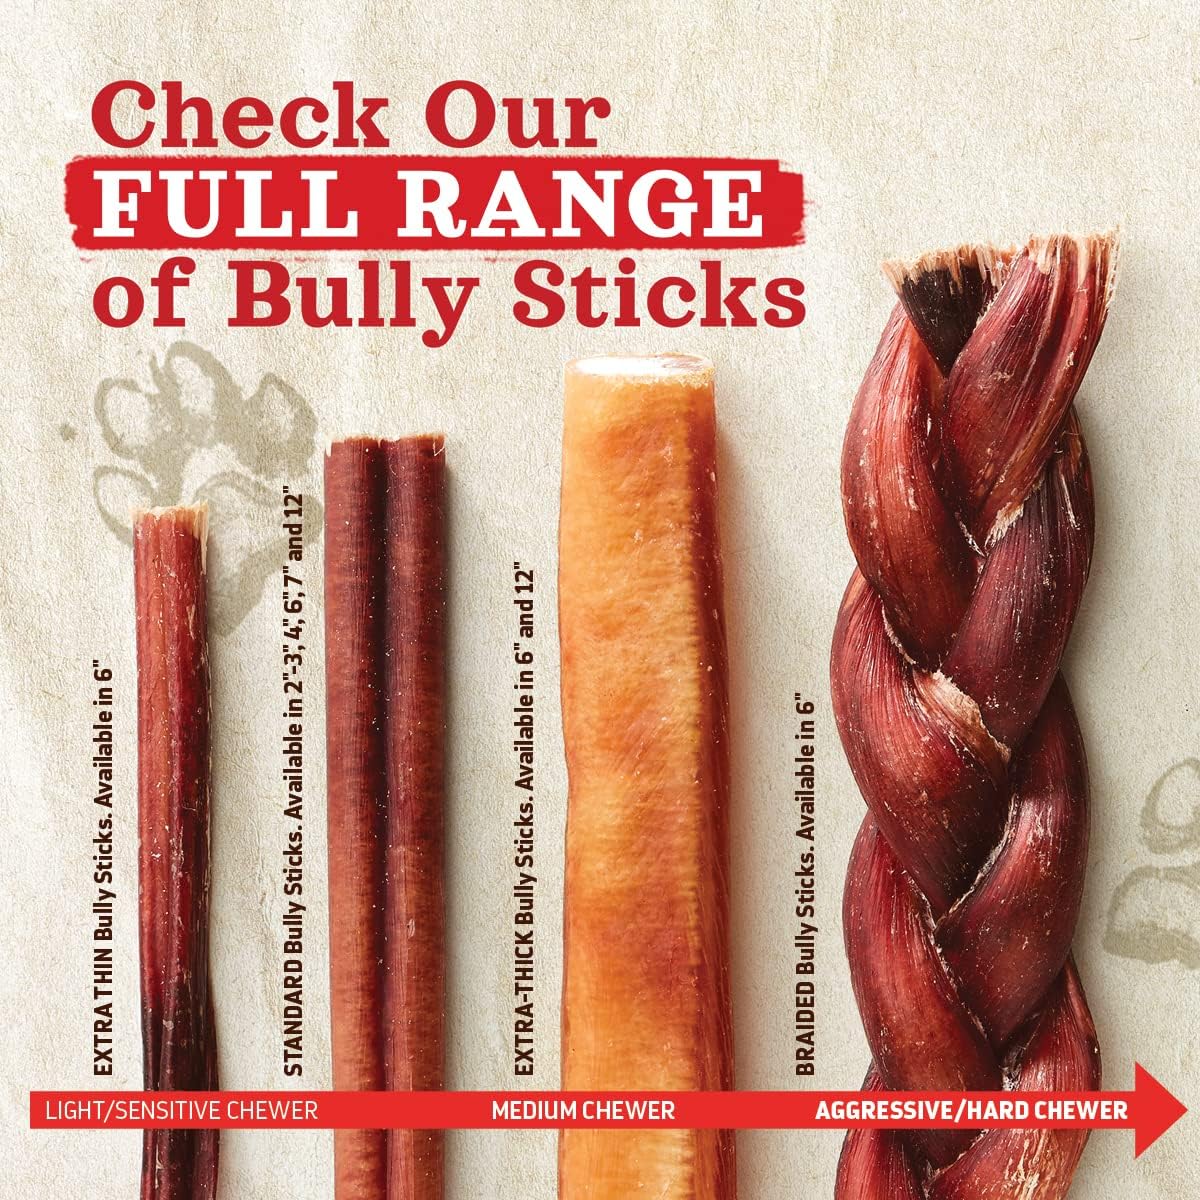 Natural Farm Odor-Free Bully Sticks (6”, 8oz) All-Natural Long-Lasting Chews, 100% Beef Pizzle, Grass-Fed, Grain-Free, Hormone-Free, Protein for Muscle Development & Energy, Perfect for Medium Dogs : Pet Supplies